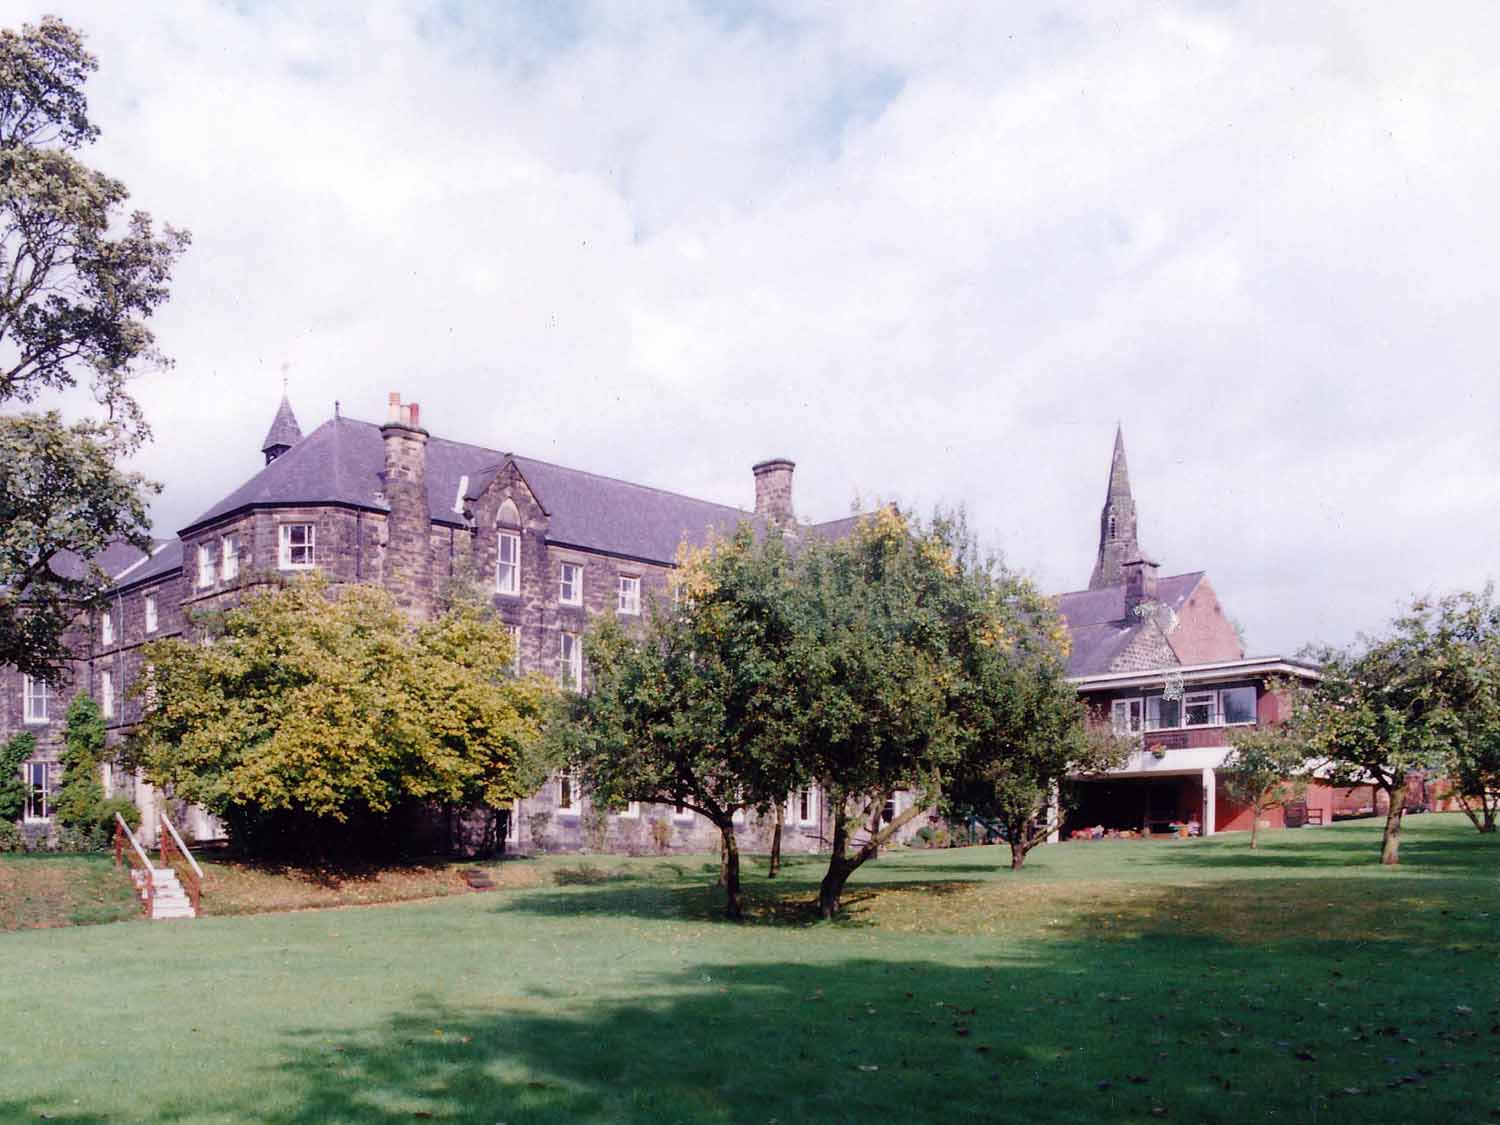 The Convent lawns